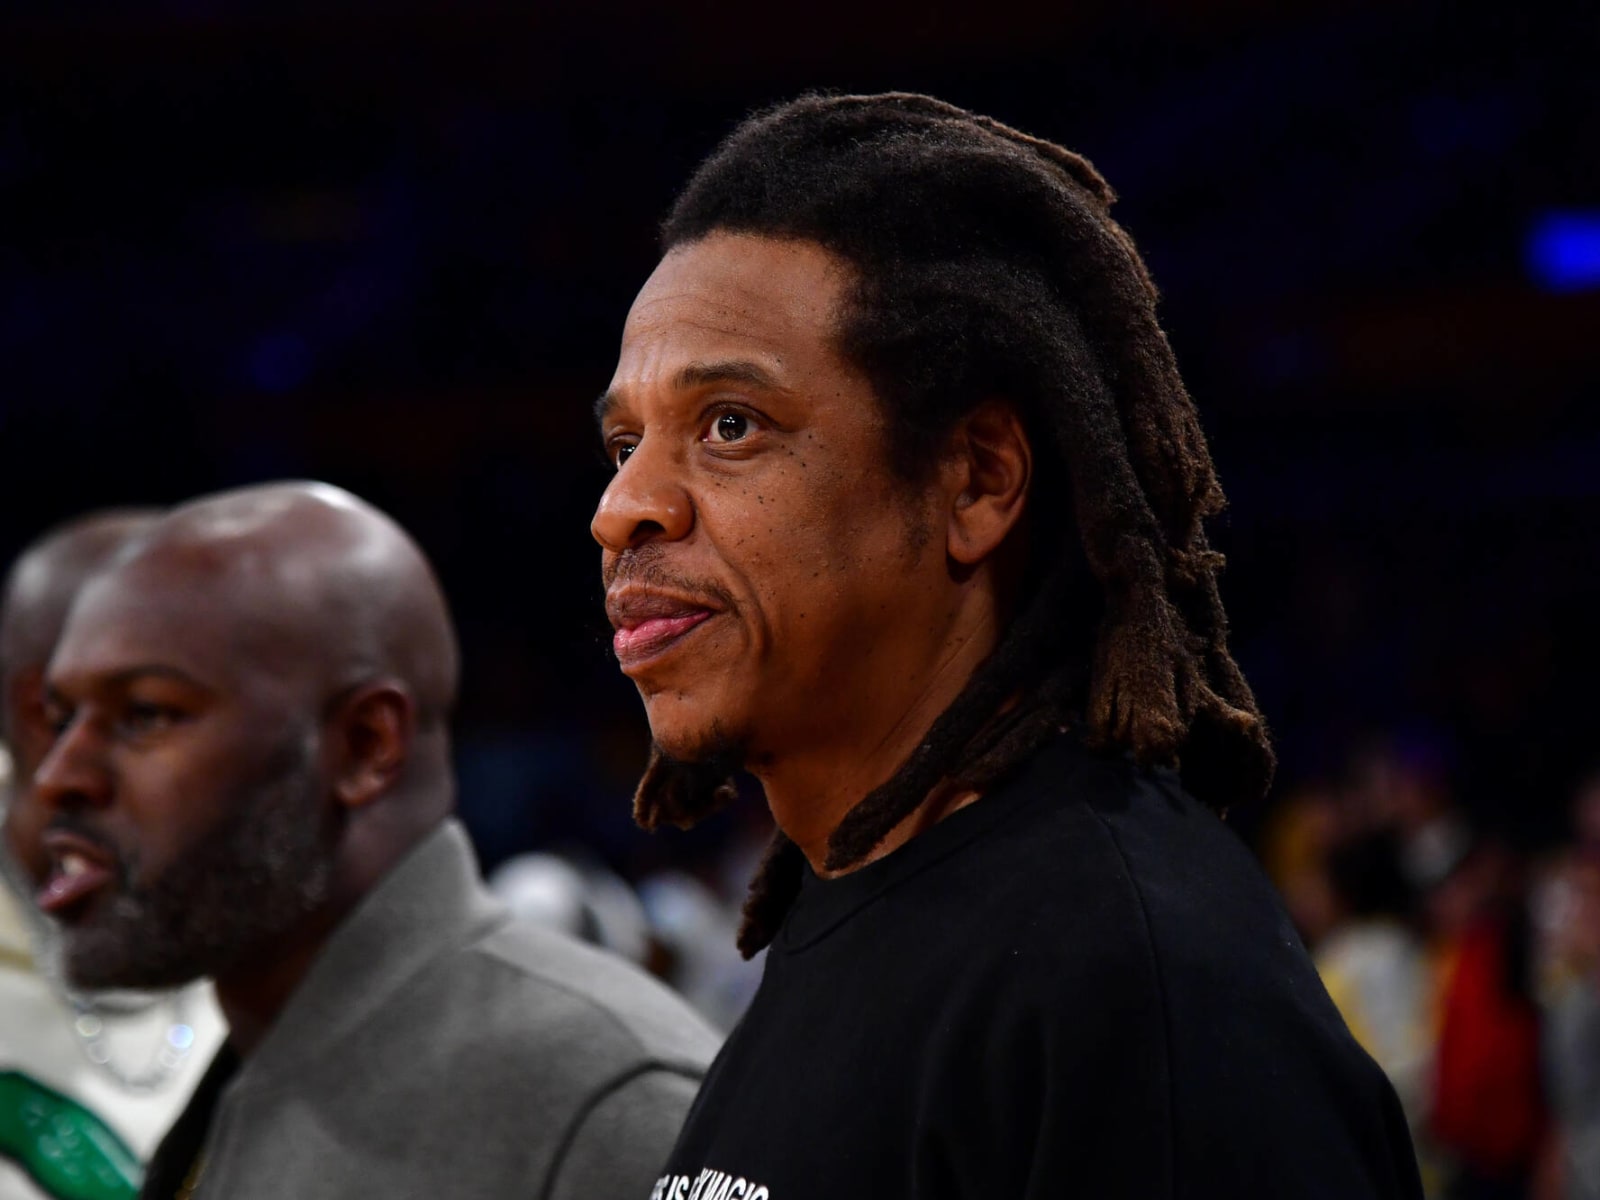 JayZ trying to calm #DenzelWashington down at the Lakers game